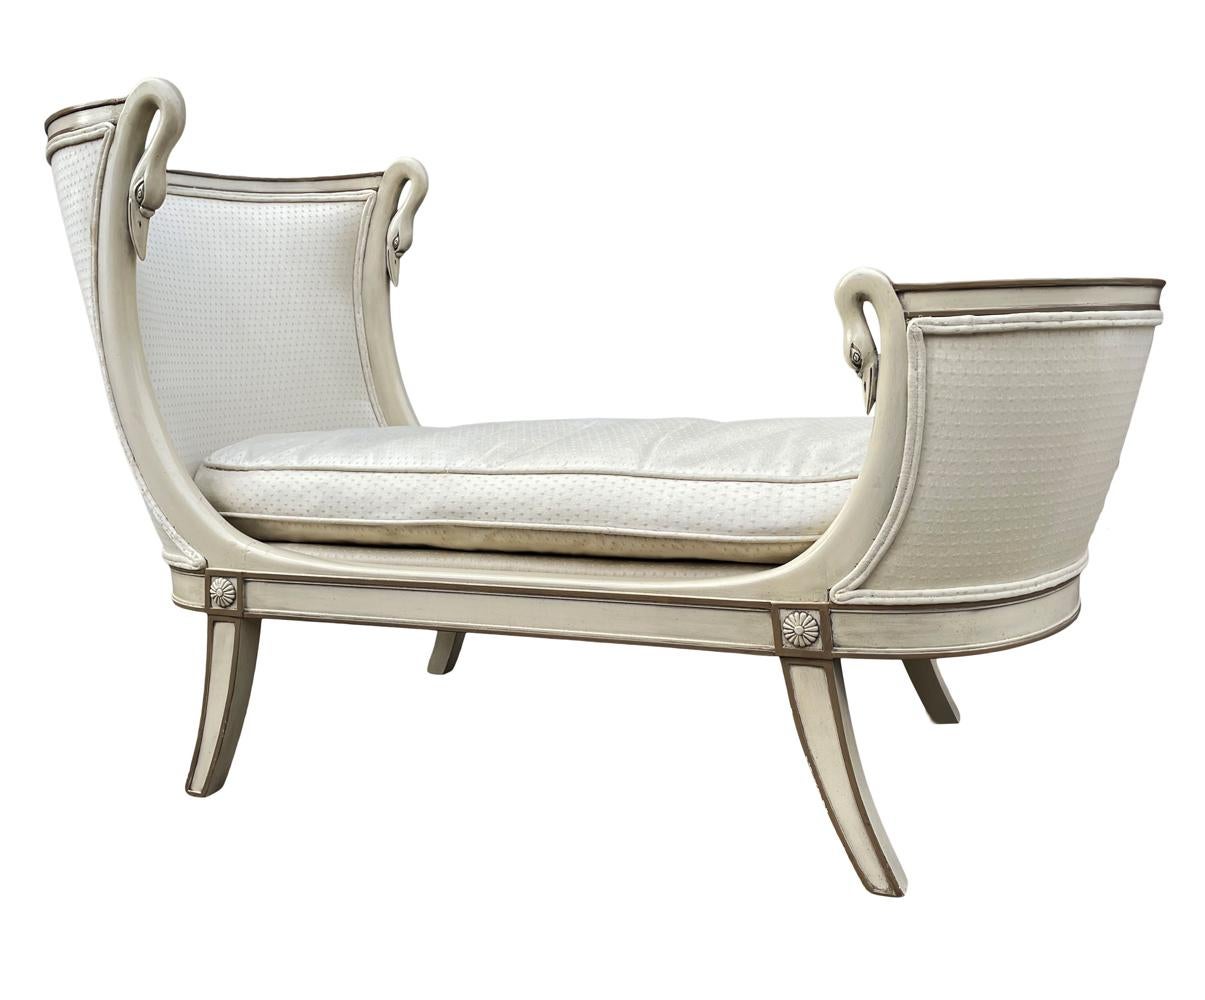 Hollywood Regency Italian Petite Chaise Lounge Chair in Cream with Swan Heads For Sale 4